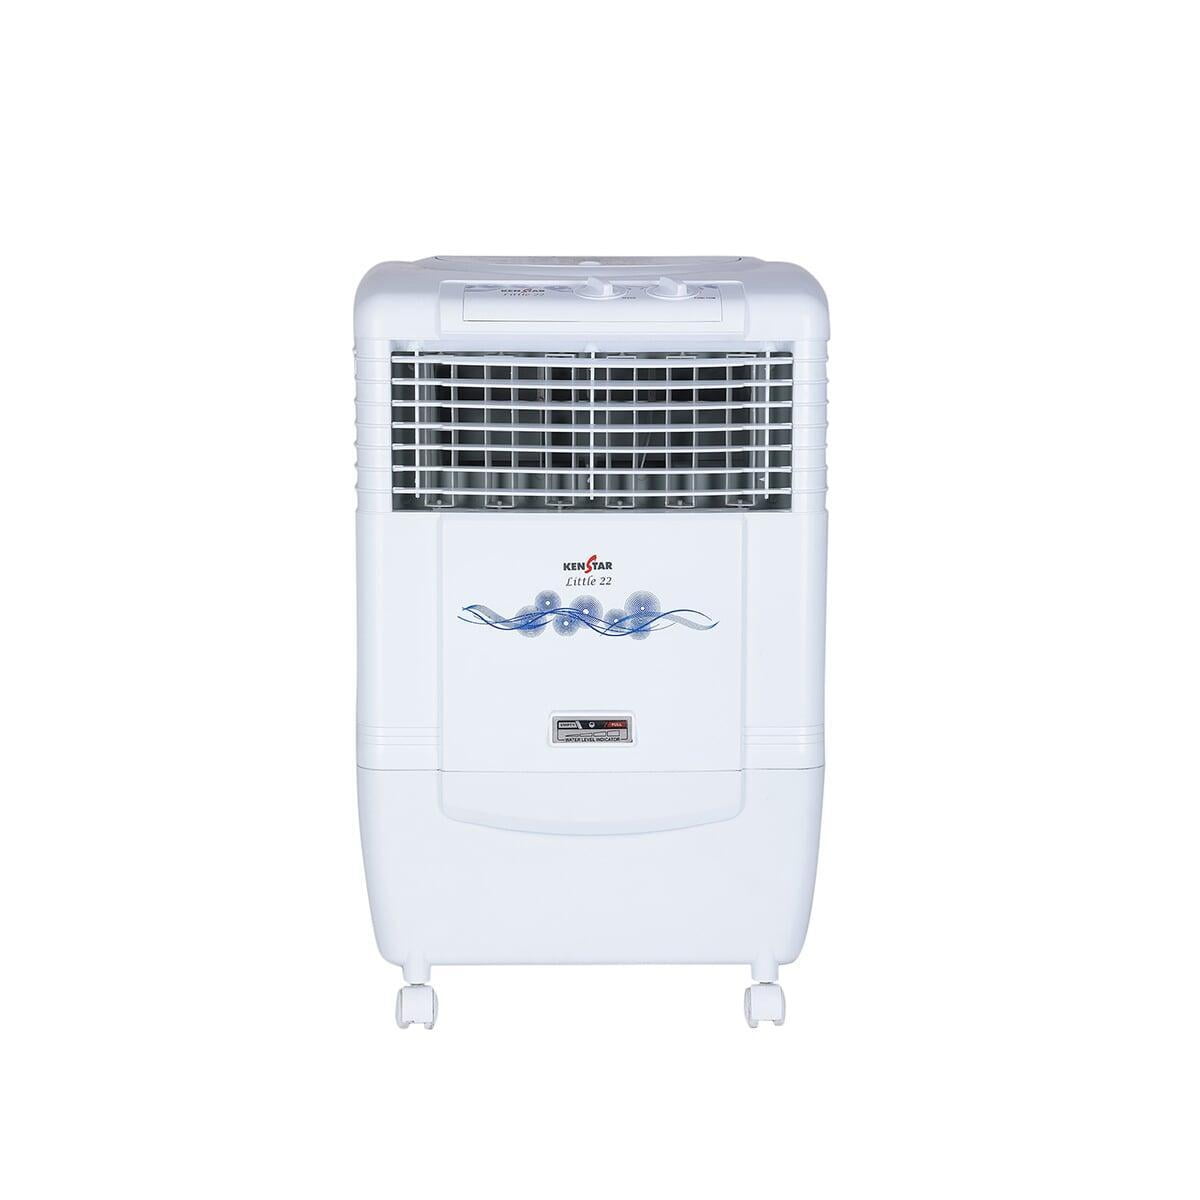 Kenstar Little 22L Personal Air Cooler On Dillimall.Com